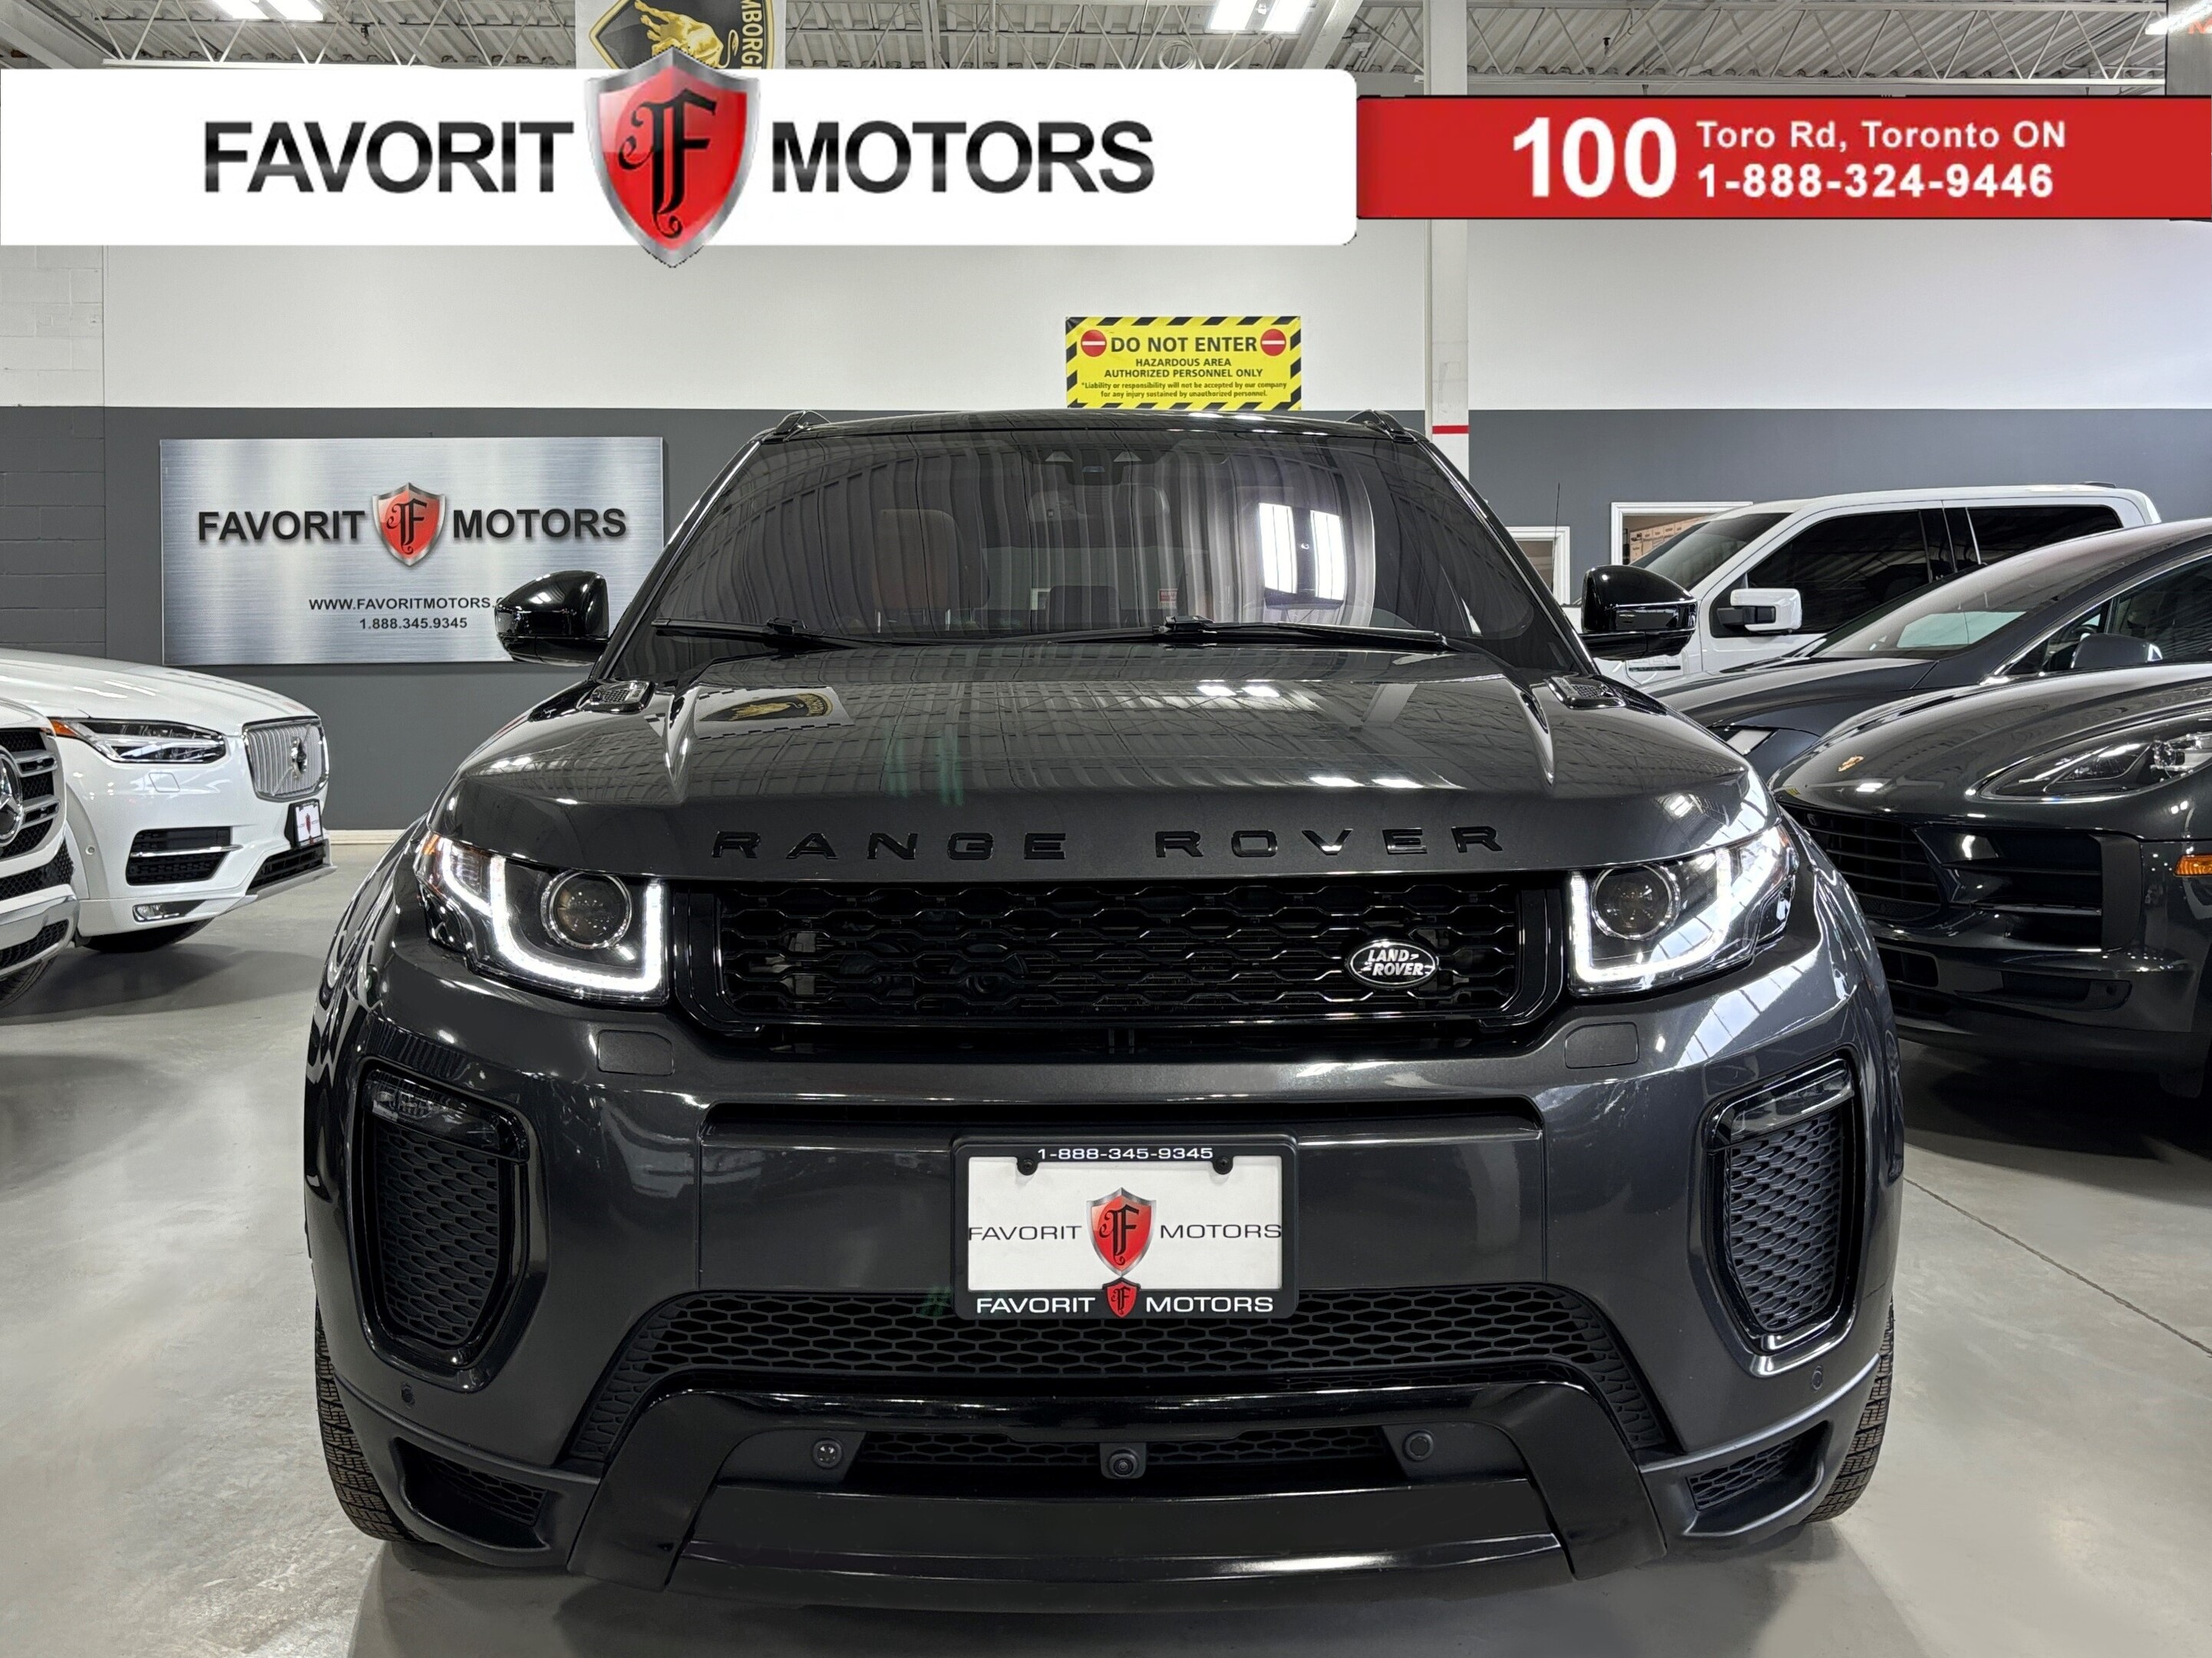 2018 Land Rover Range Rover Evoque HSE Dynamic|NAV|MASSAGE|MERIDIAN|PANOROOF|AMBIENT|